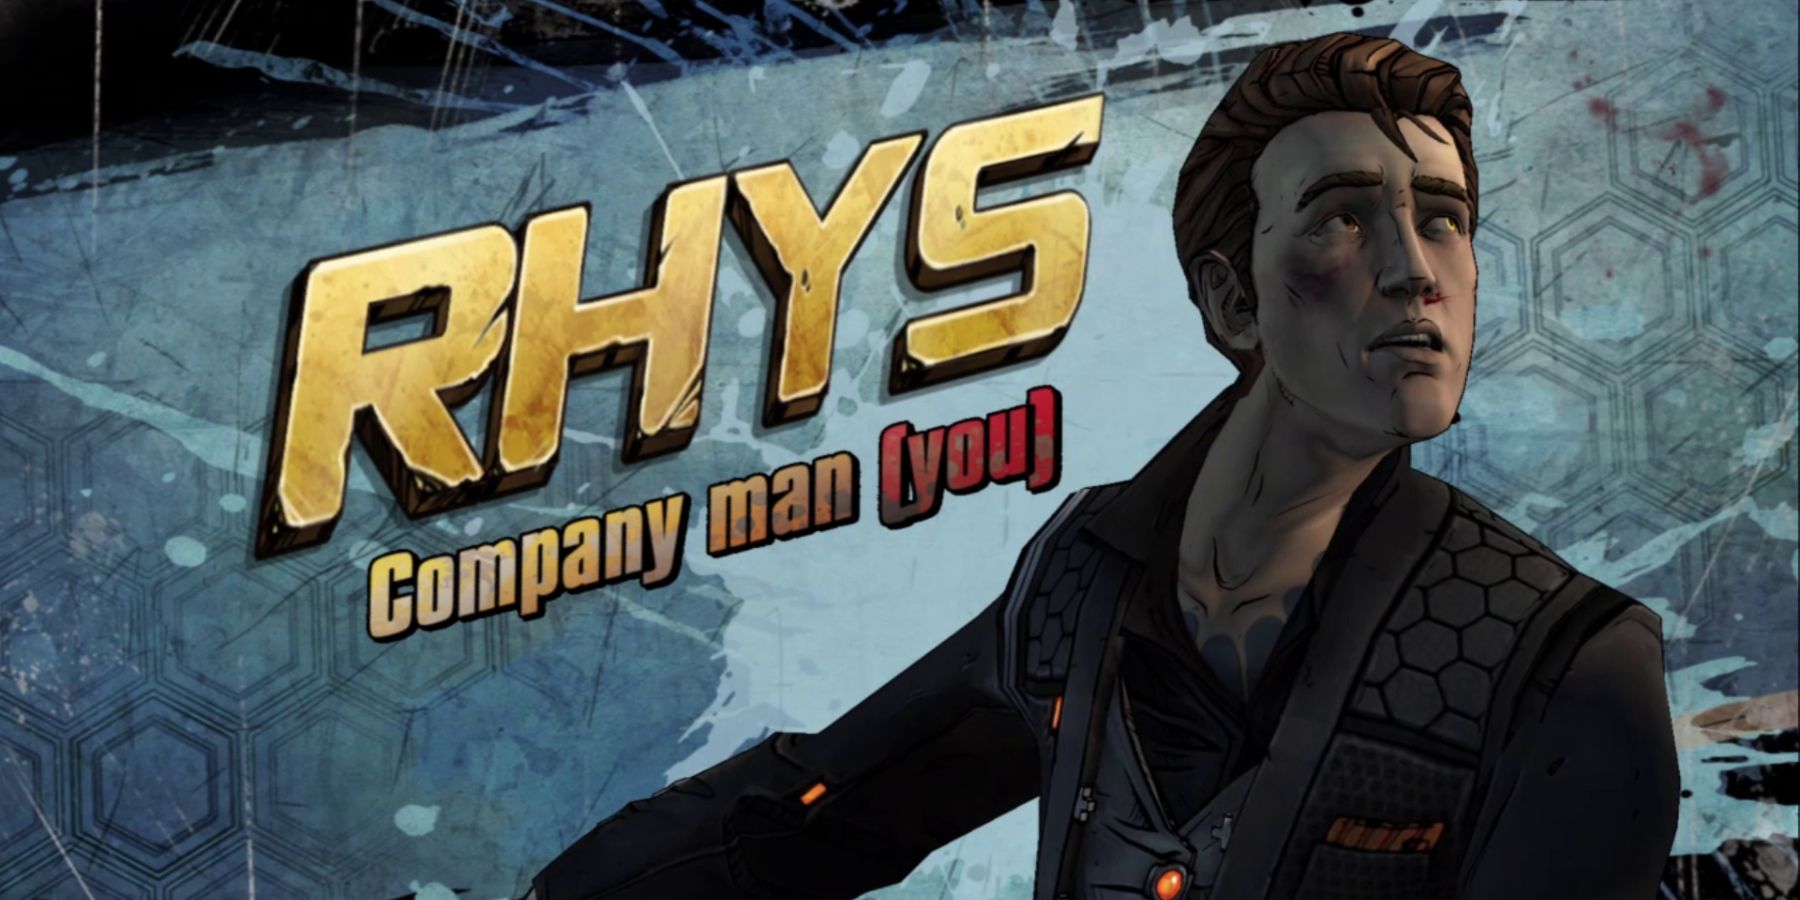 a man with slicked, brown hair in a dark vest over a dark shirt, reels as though he's just been punched. text reads: Rhys: company man (you)